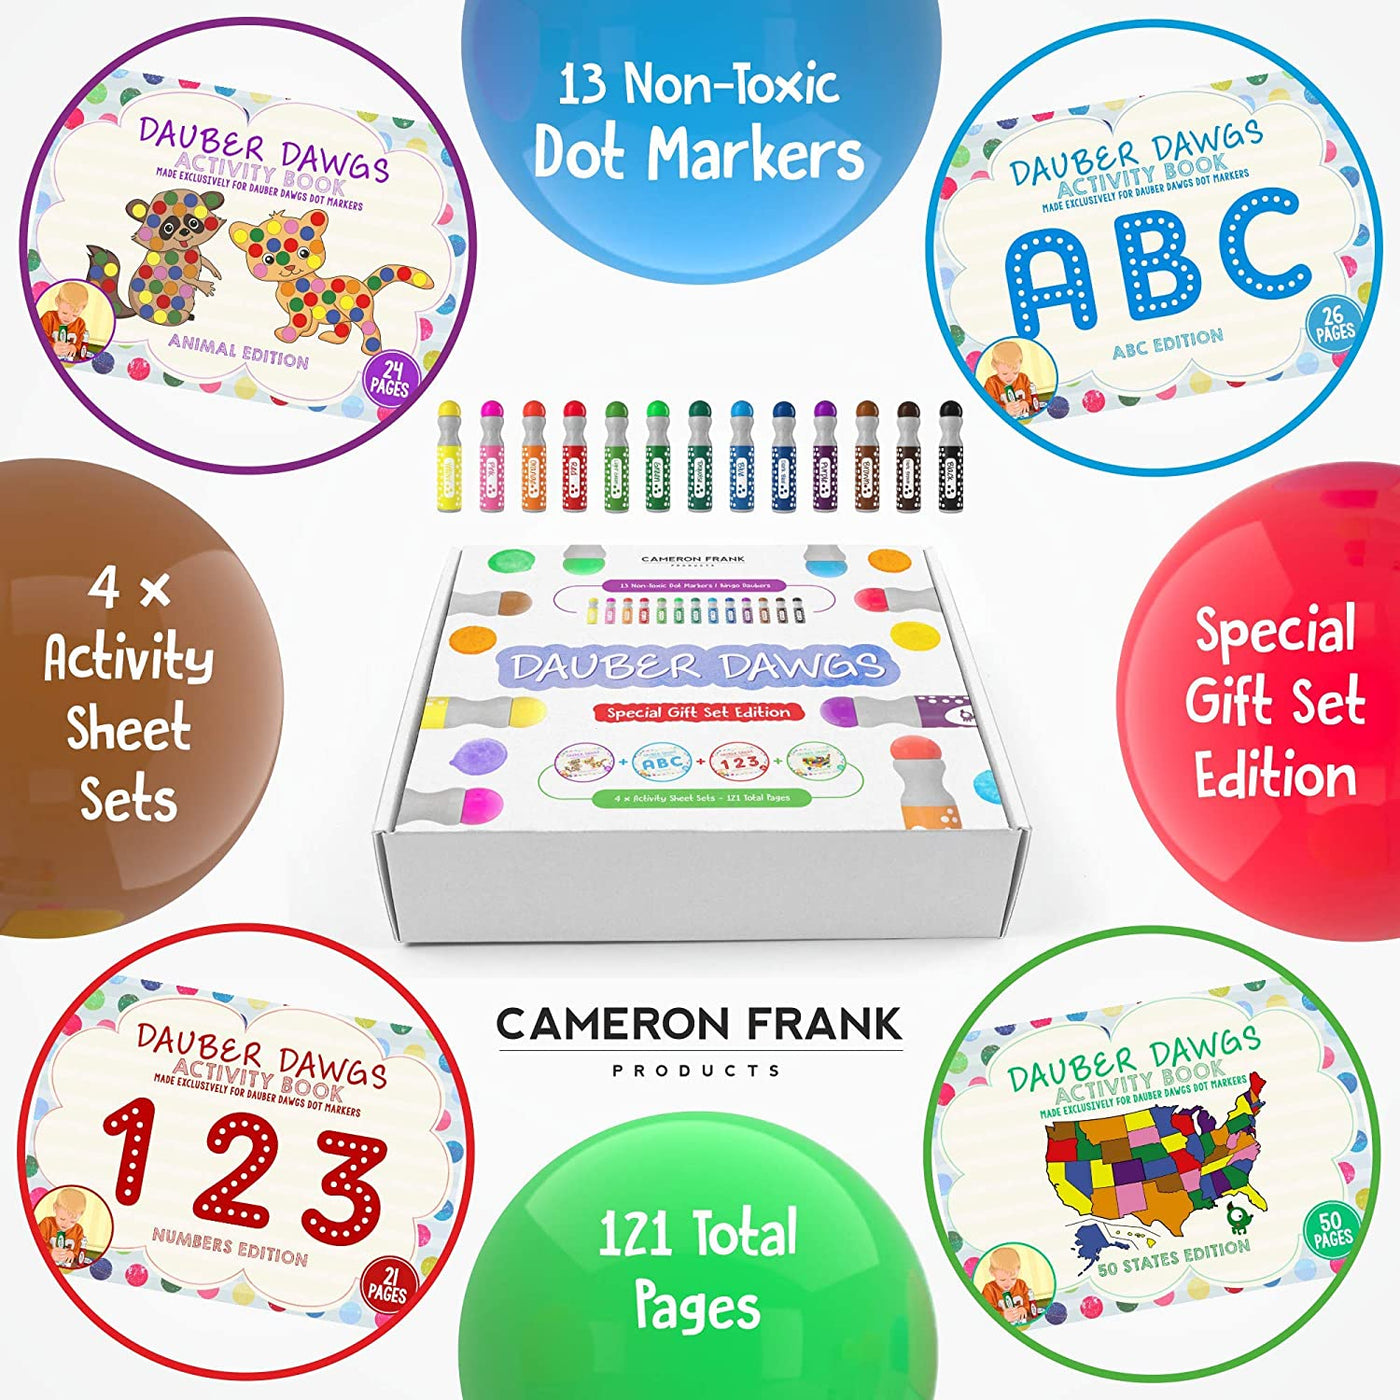 Cameron Frank Products Dot Markers for Toddlers 1-3 - Set of 8 Dauber Dawgs  Washable Dot Paints with 3 Activity Book PDFs, Dot Daubers for Creative  Play and Learning